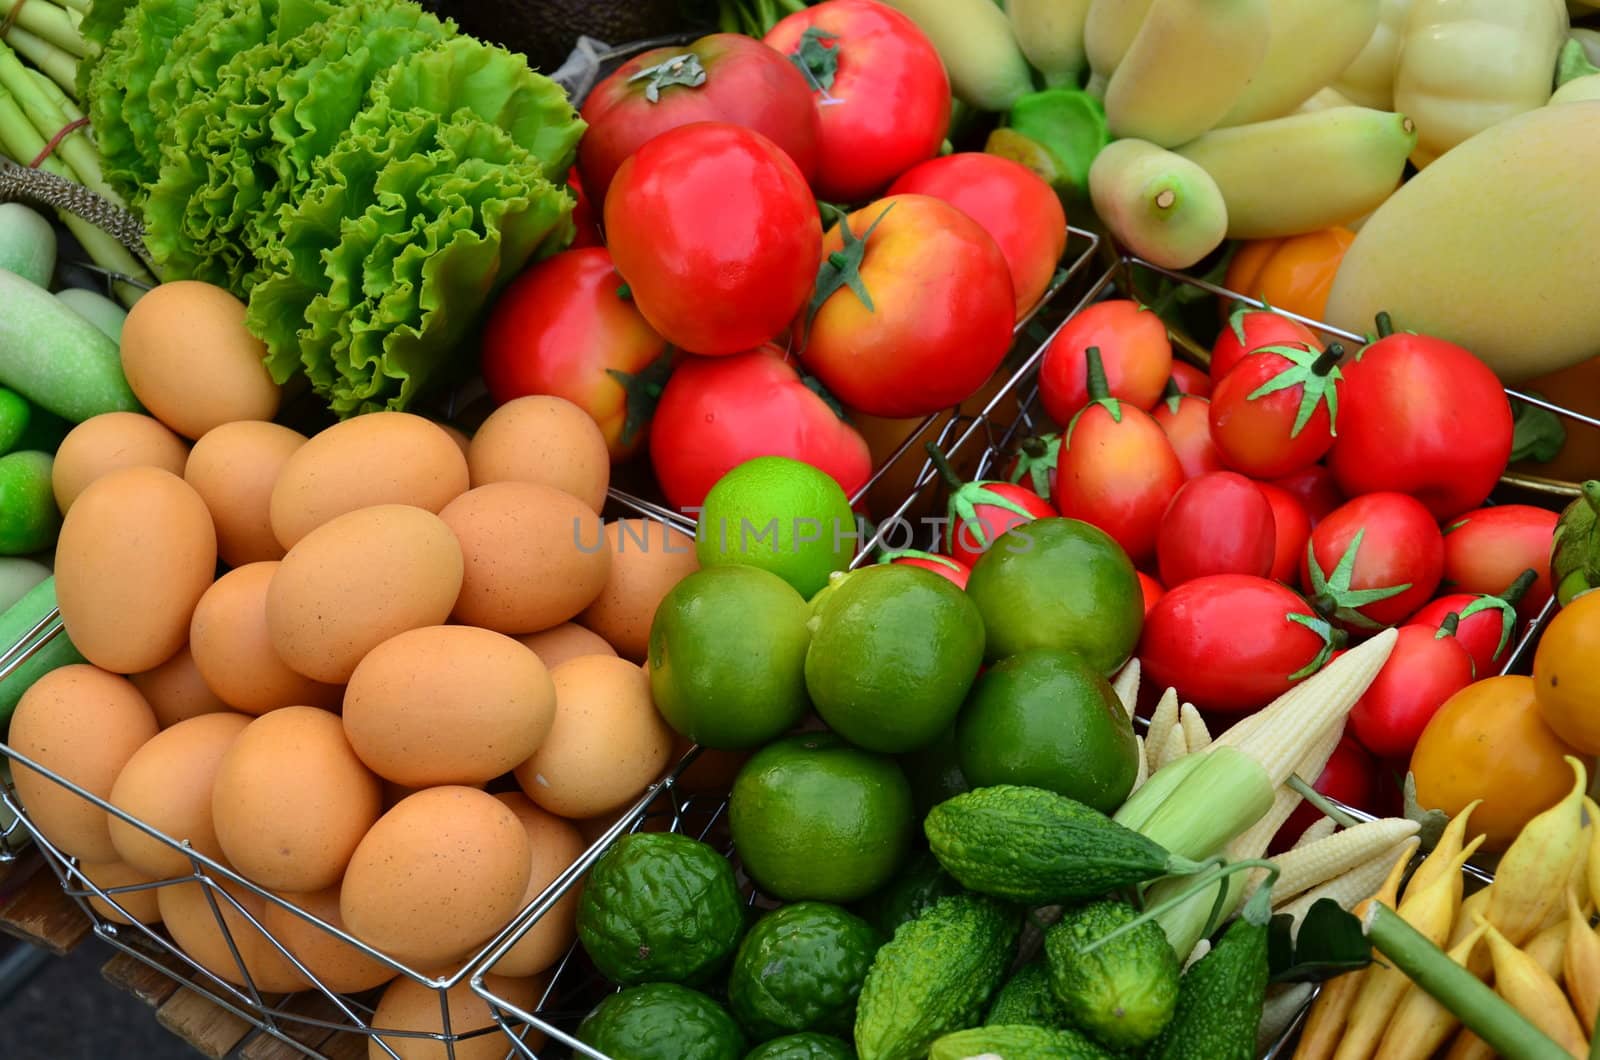 Fruits, vegetables, eggs, used as a component of the meal.